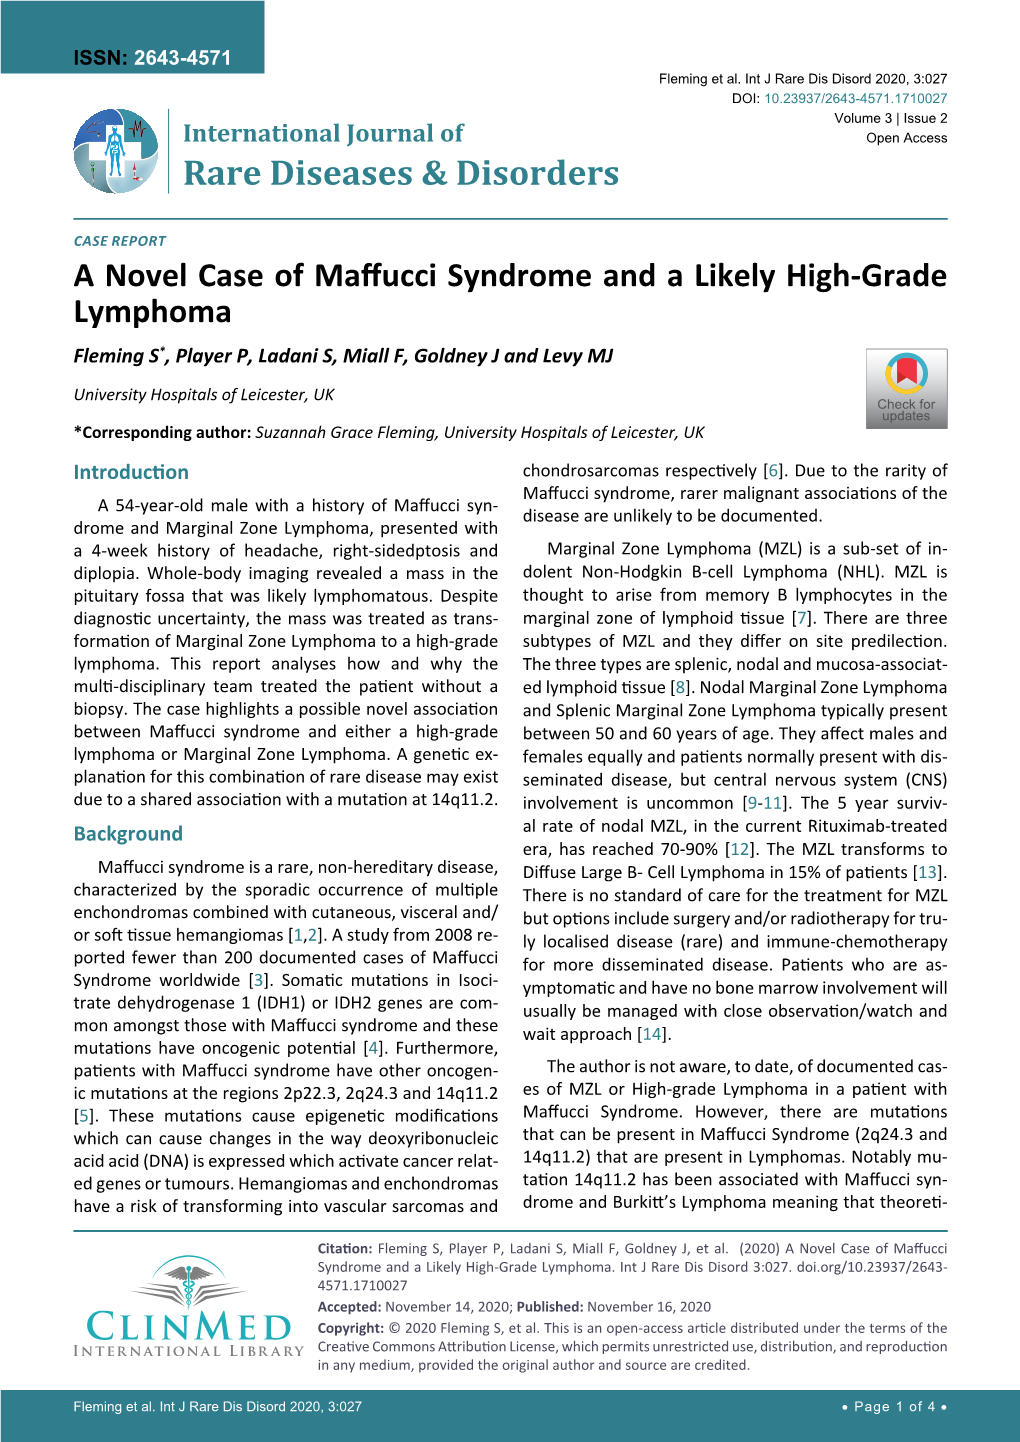 A Novel Case of Maffucci Syndrome and a Likely High-Grade Lymphoma Fleming S*, Player P, Ladani S, Miall F, Goldney J and Levy MJ